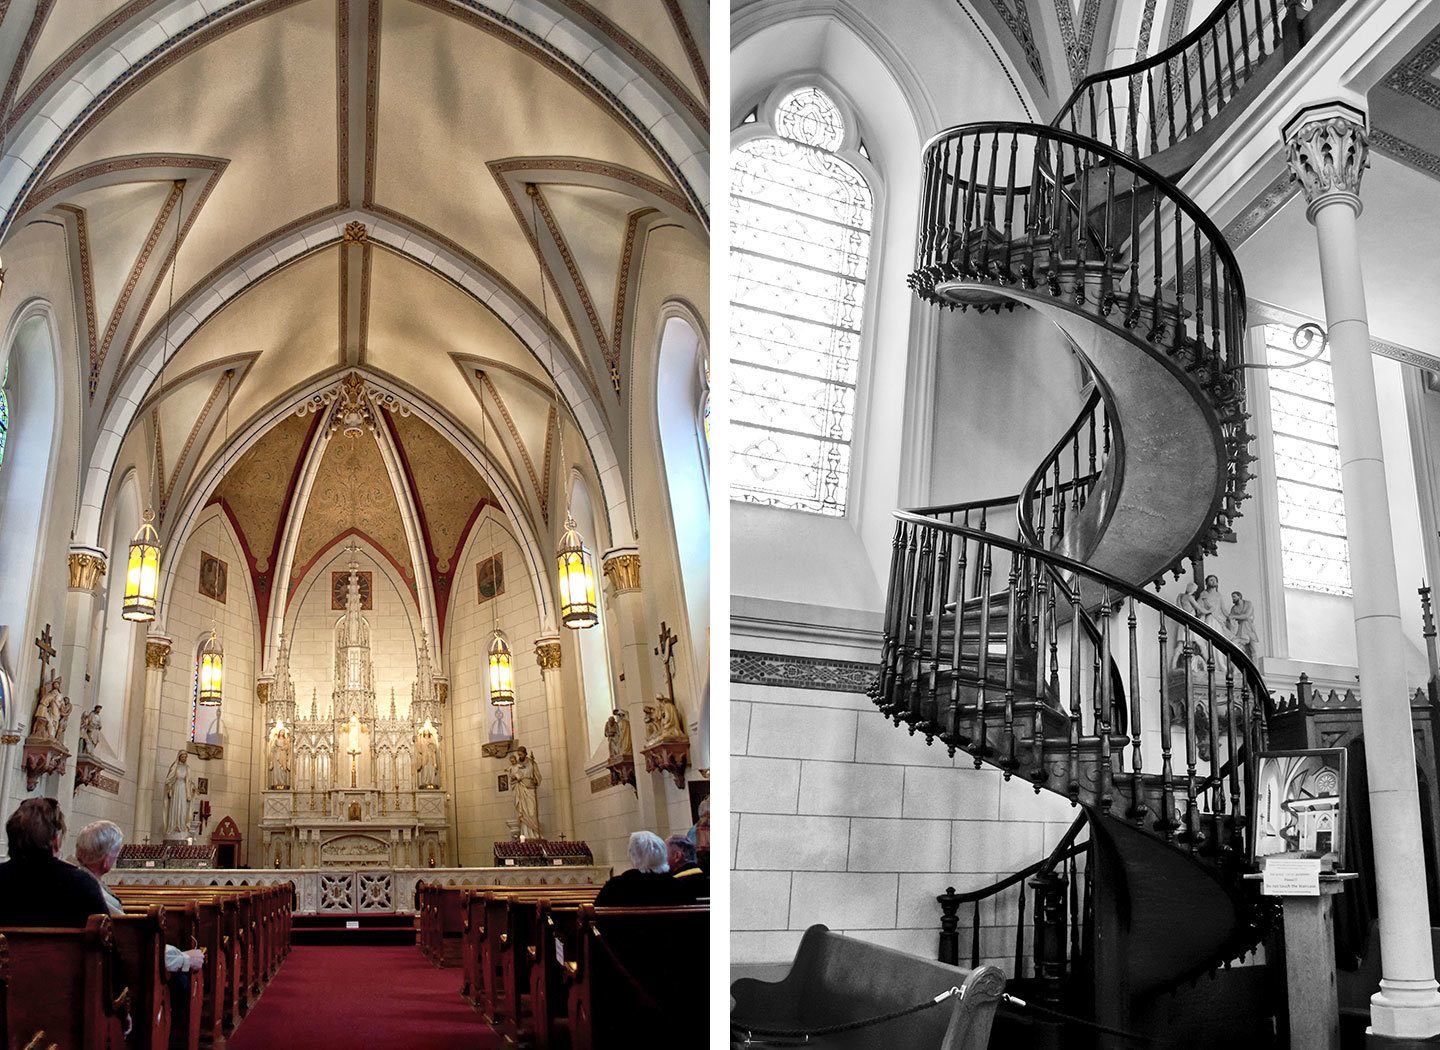 Inside the Loretta Chapel and the miraculous staircase in Santa Fe